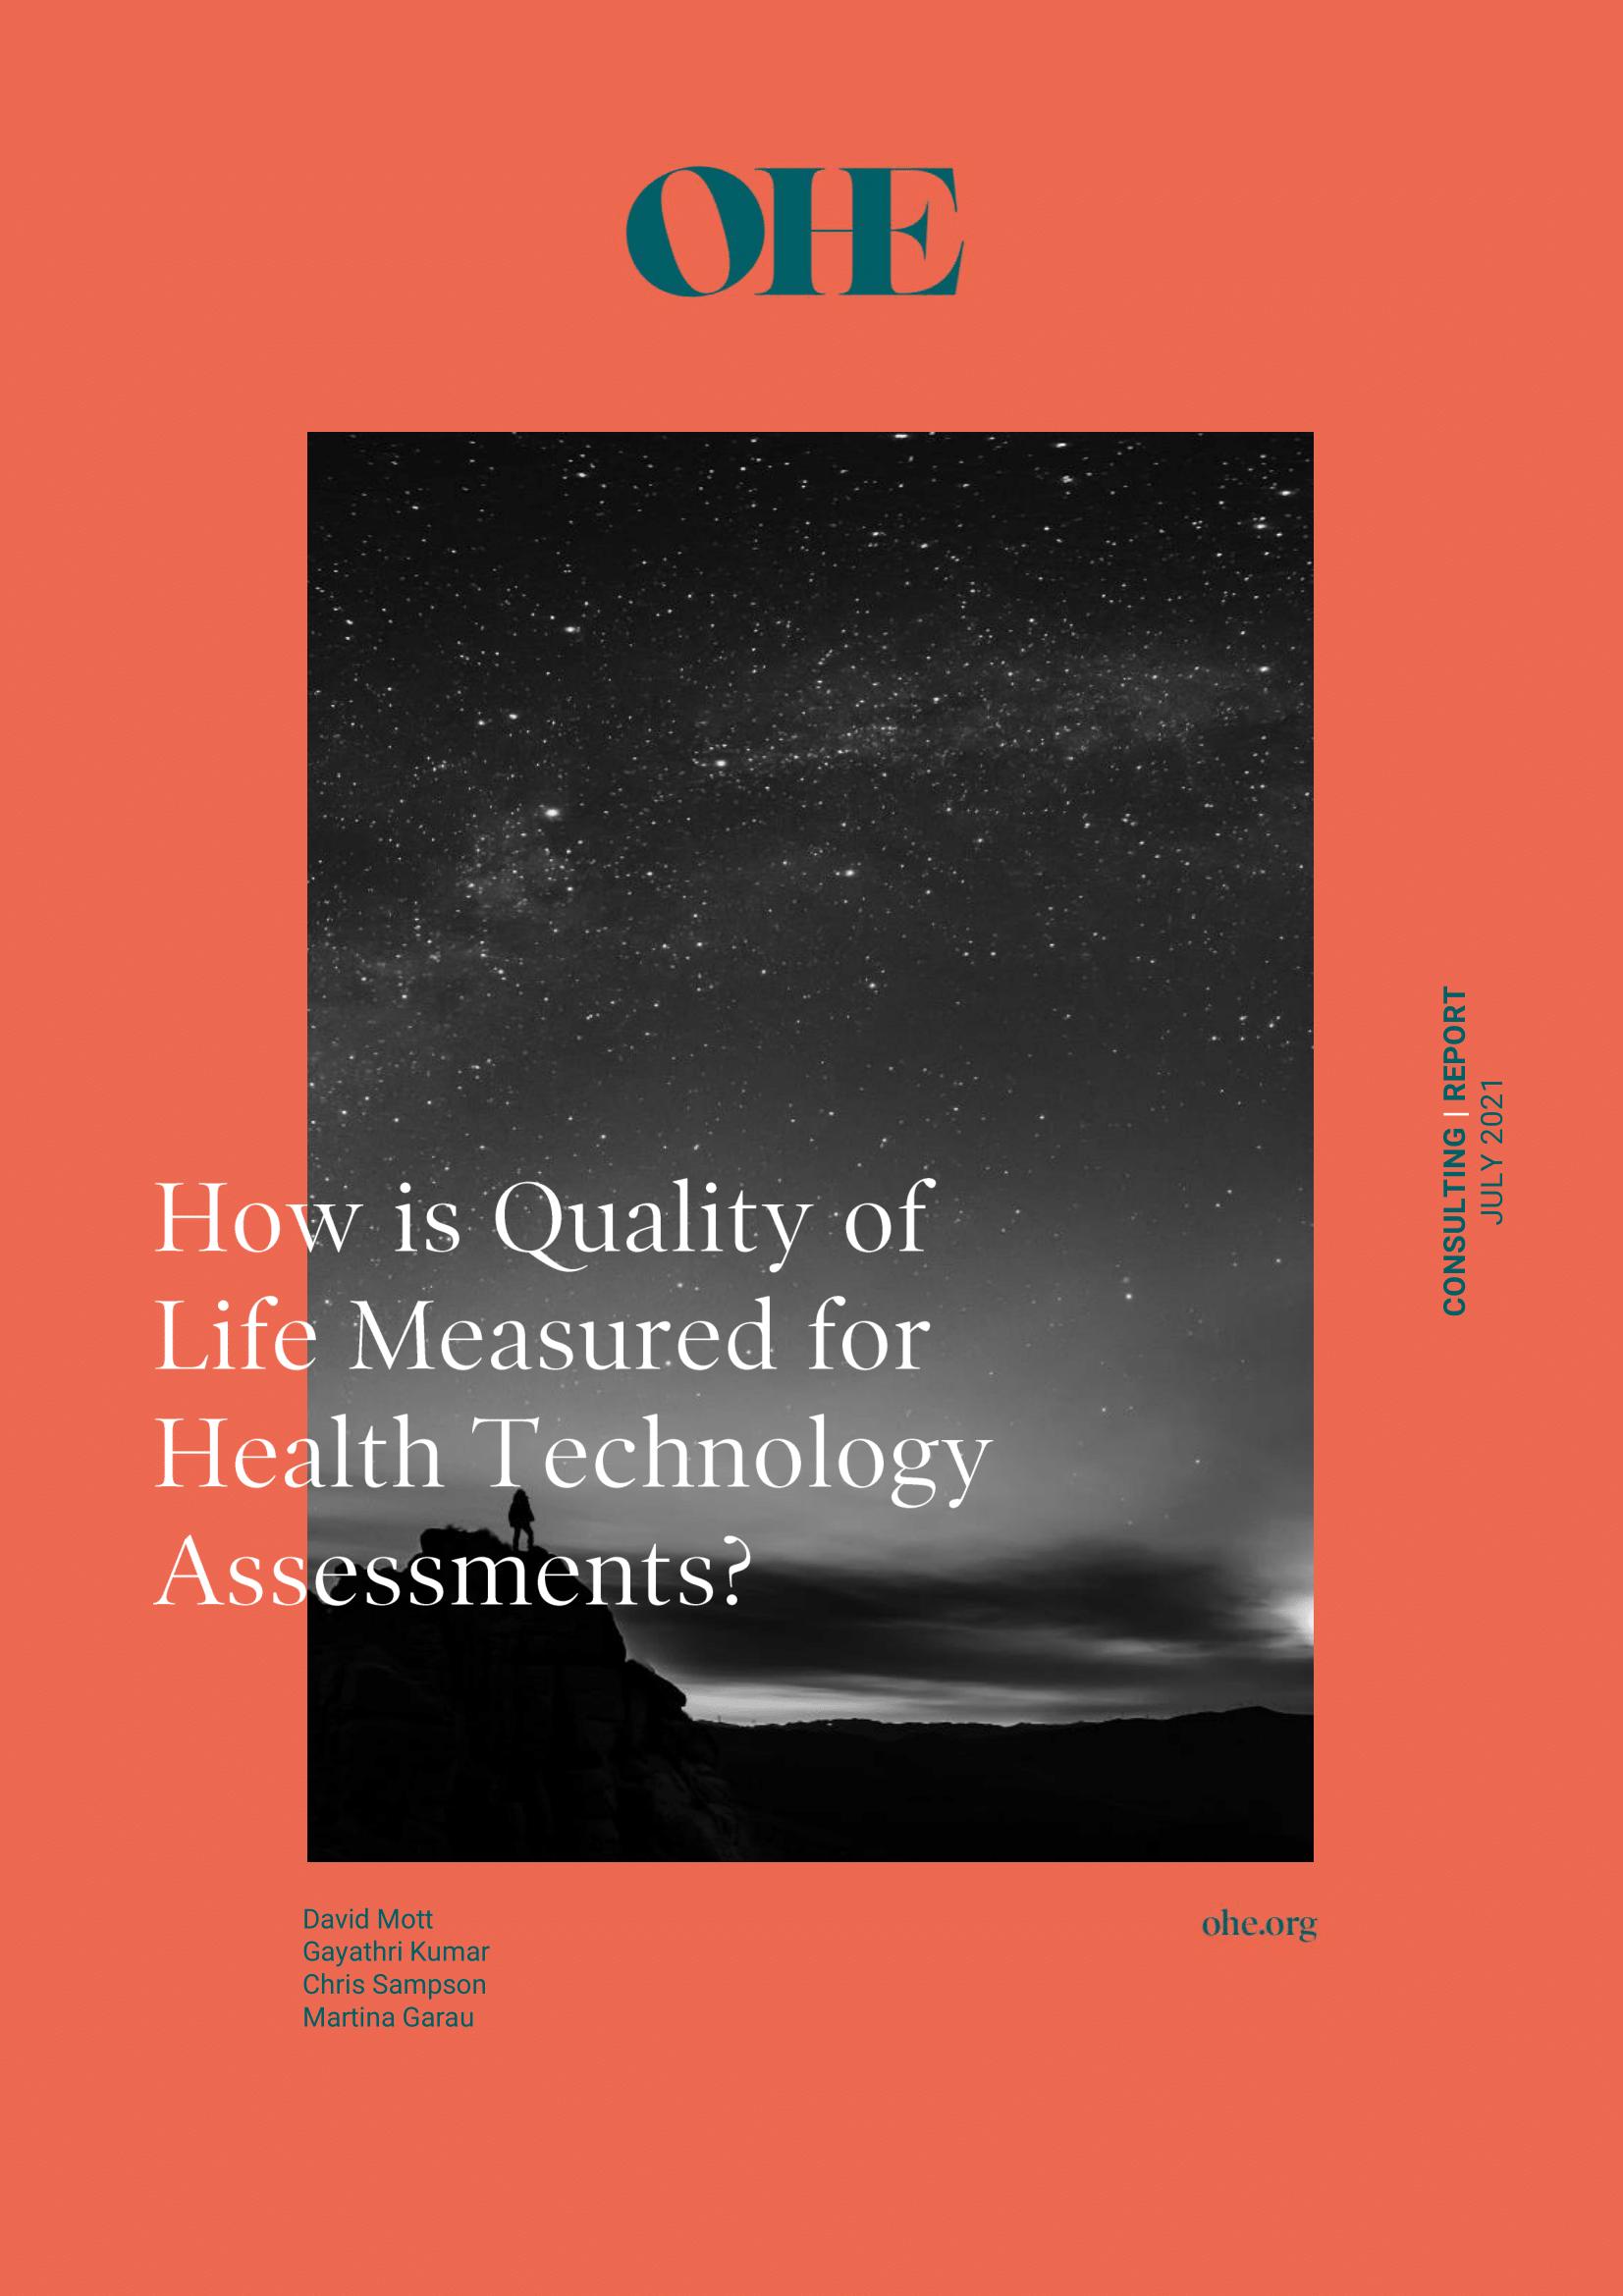 How is Quality of Life Measured for Health Technology Assessments?